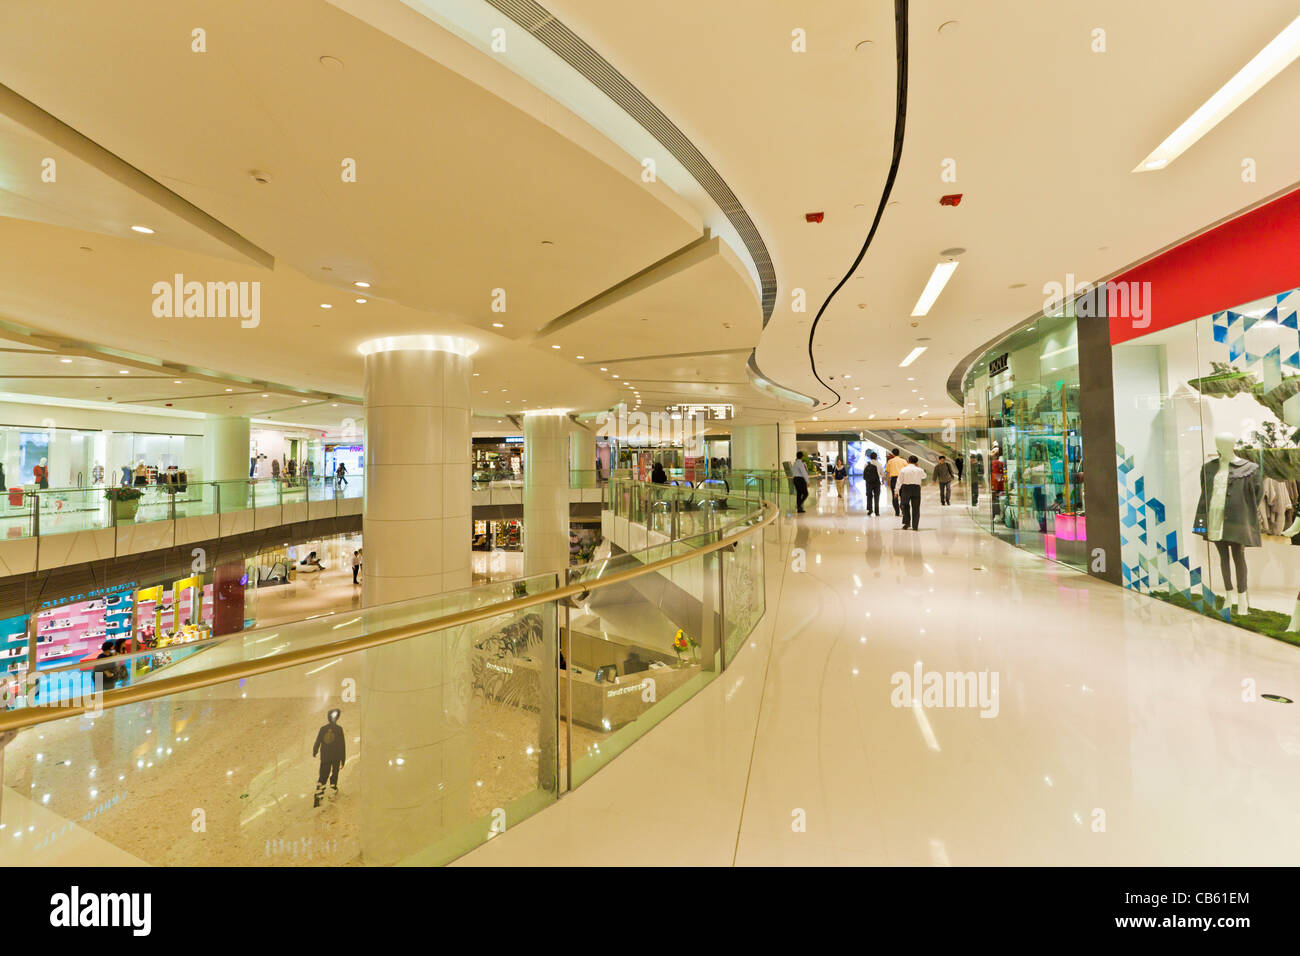 Interior of a large modern shopping mall Pudong area Shanghai city PRC people's republic of china asia Stock Photo